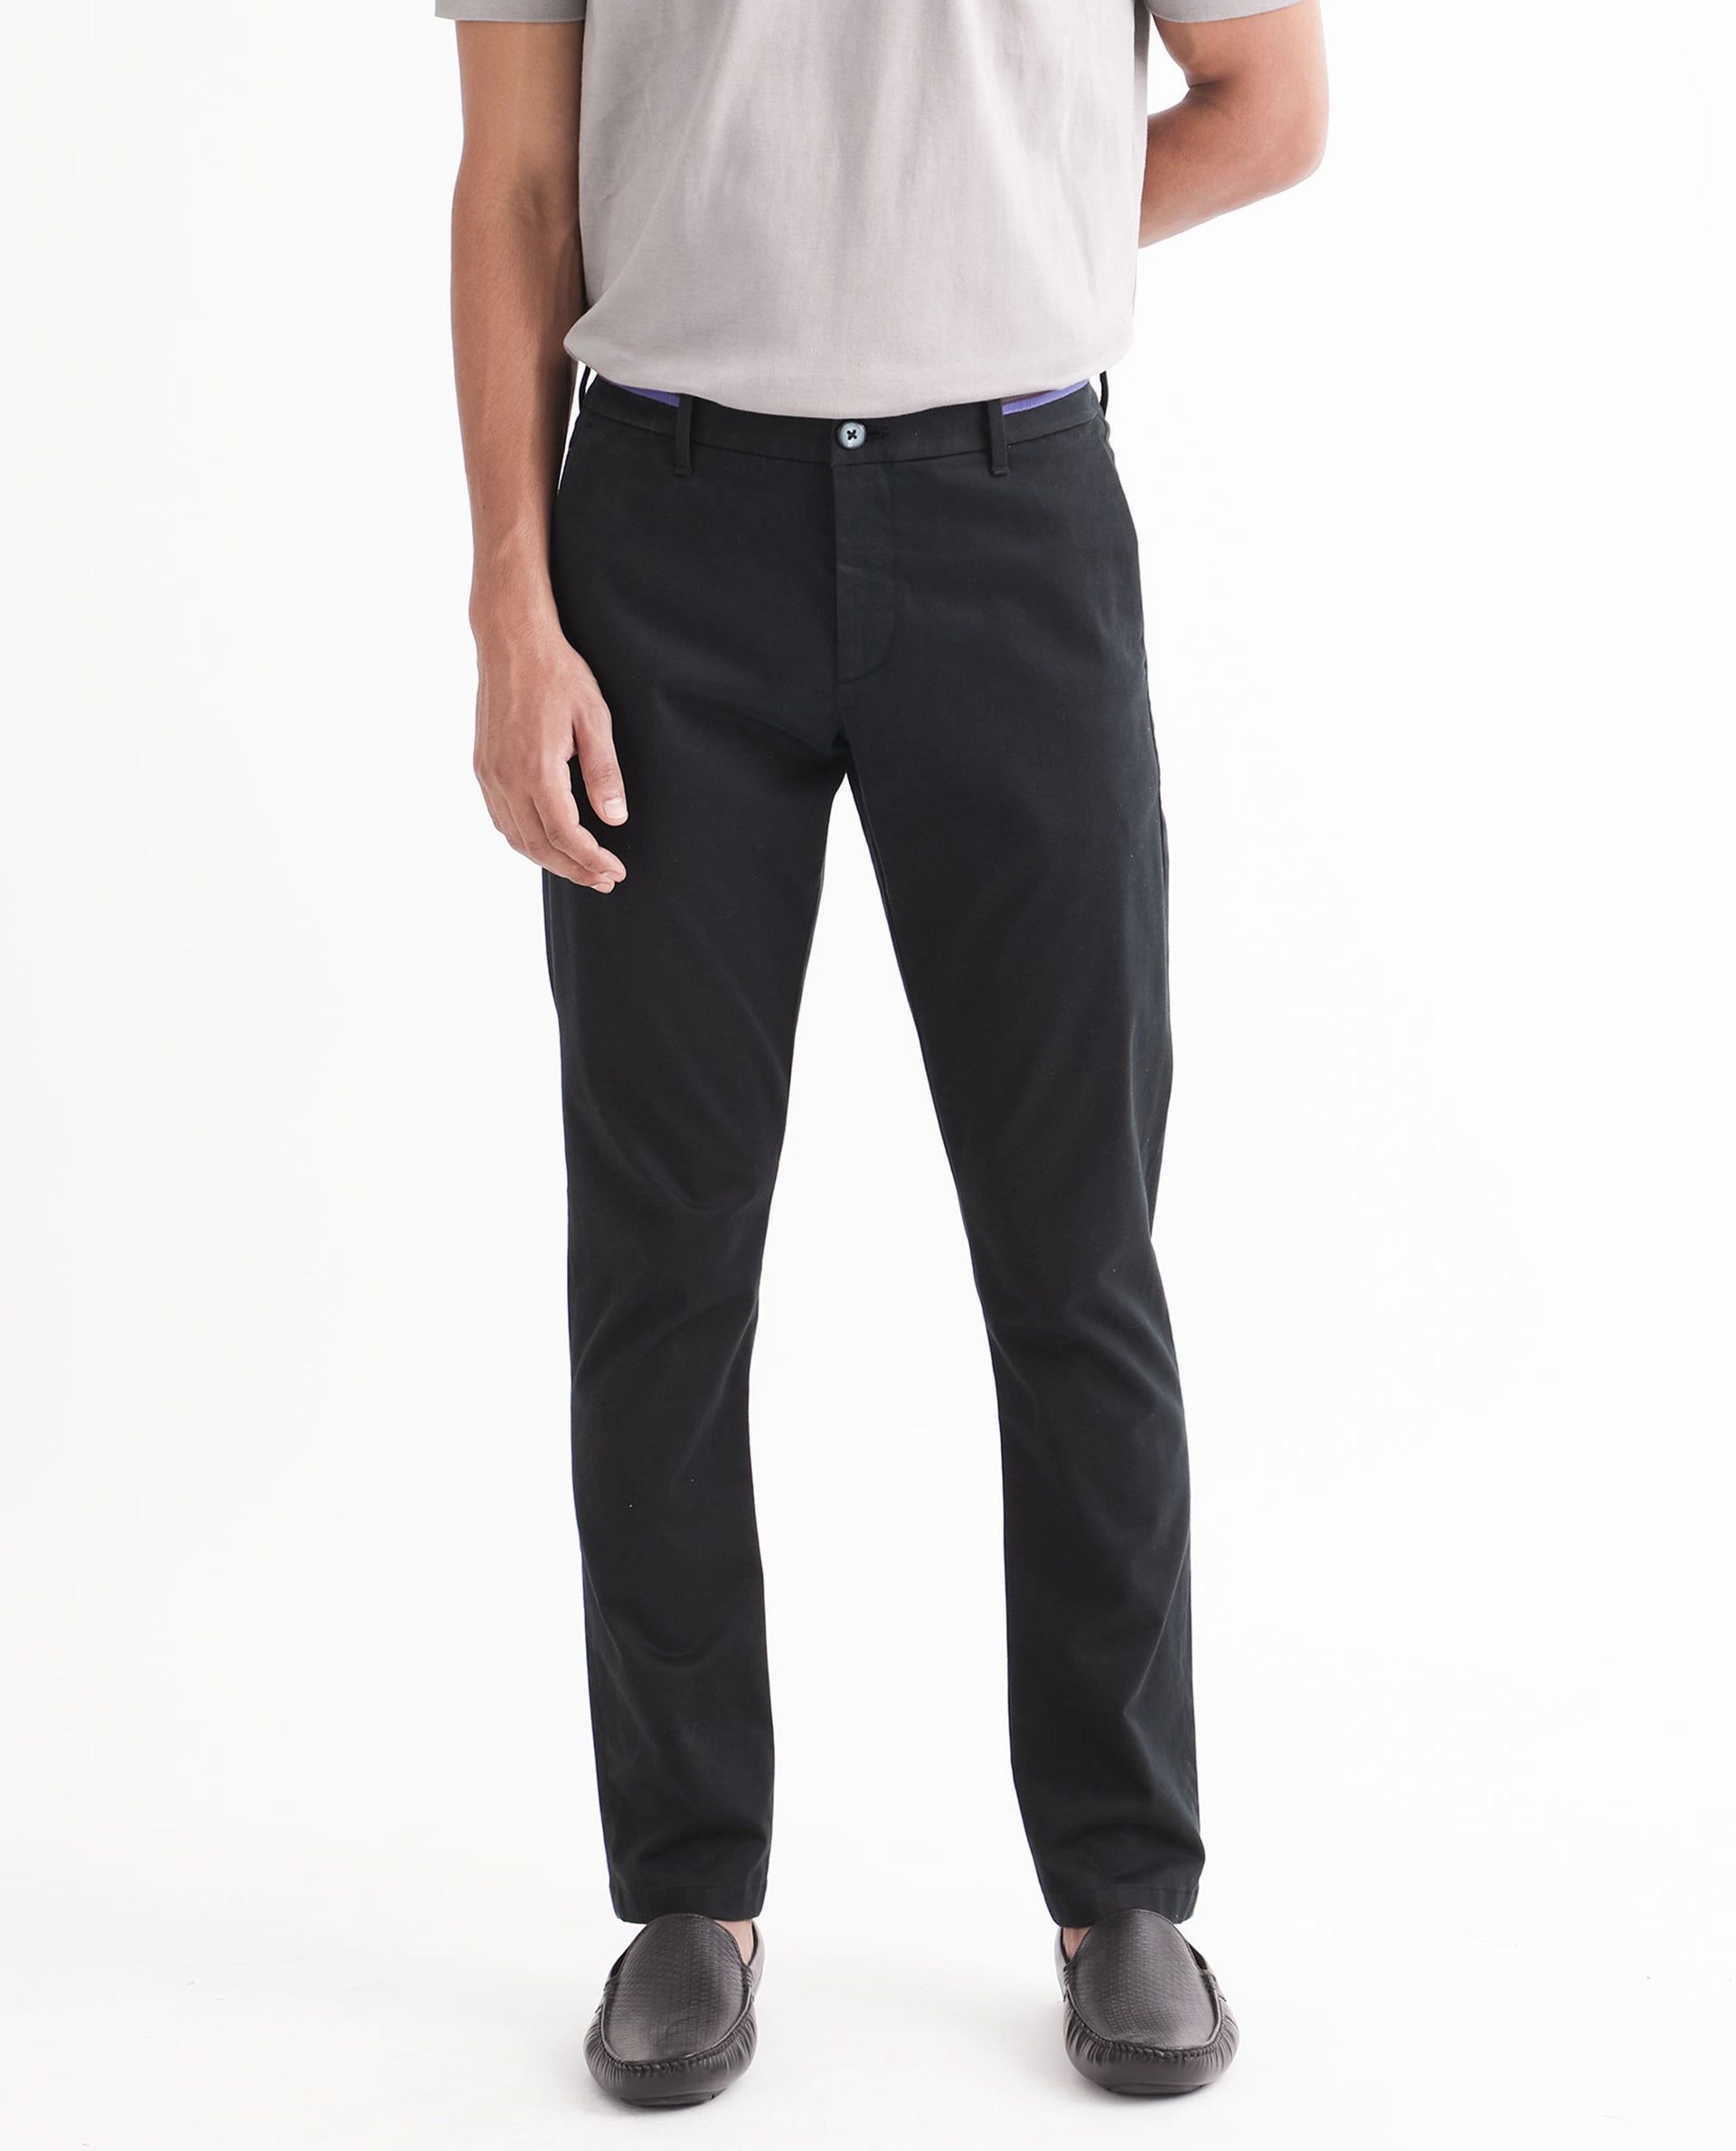 Collection By Michael Strahan Mens Regular Fit Flat Front Pant, Color: Blue  - JCPenney